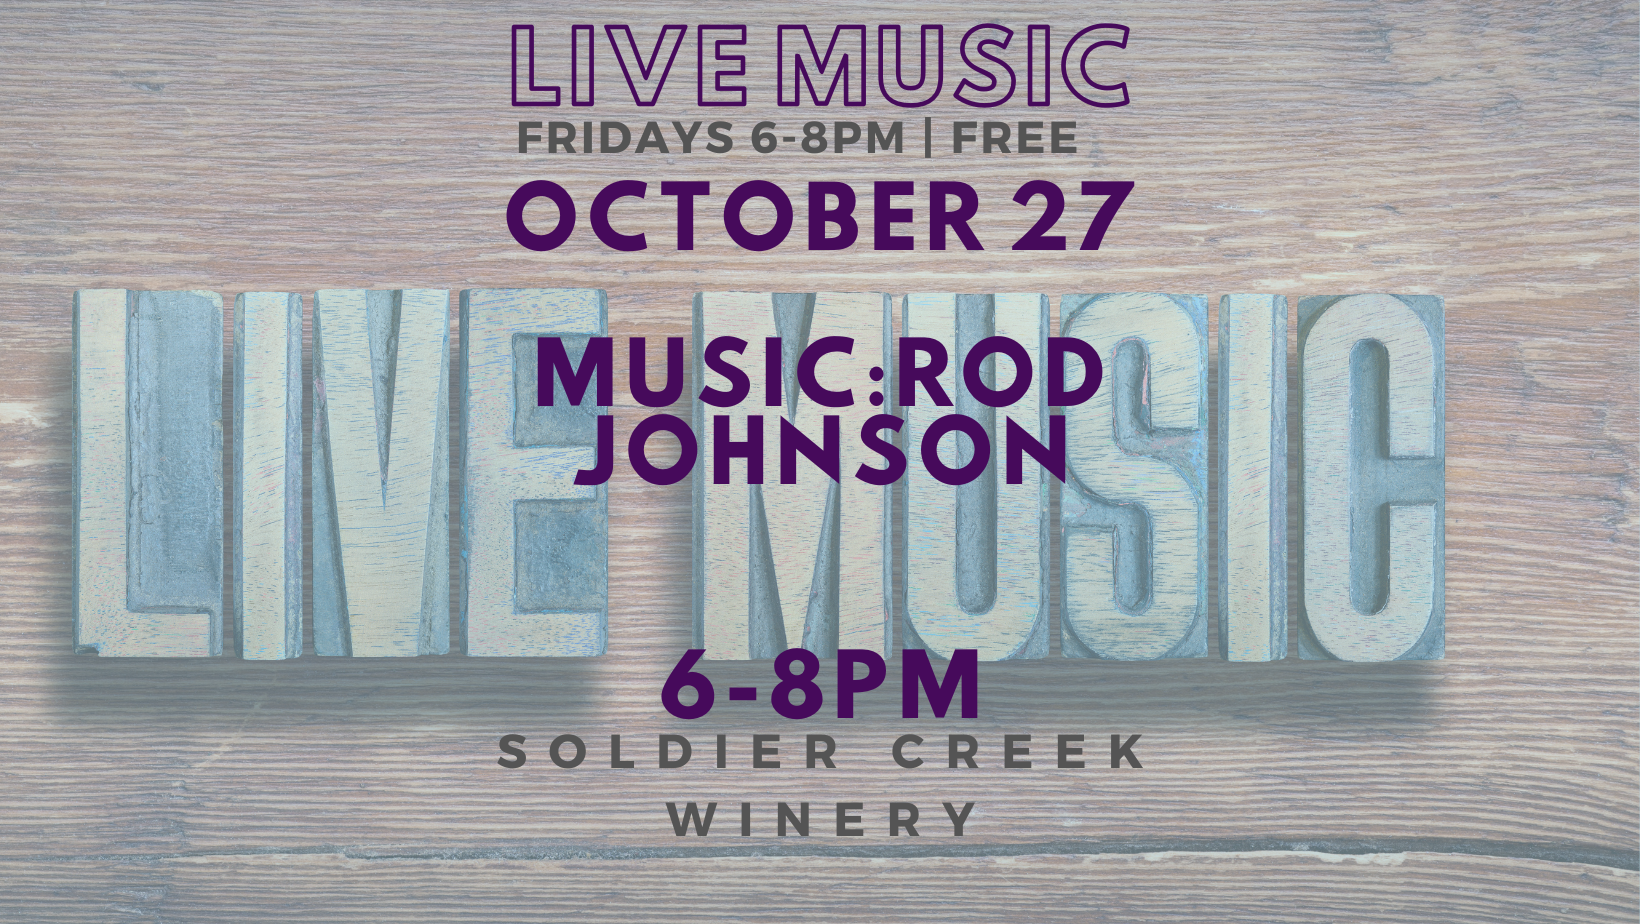 live music at soldier creek winery every friday, october 27 is rod johnson from 6-8pm. free to listen!